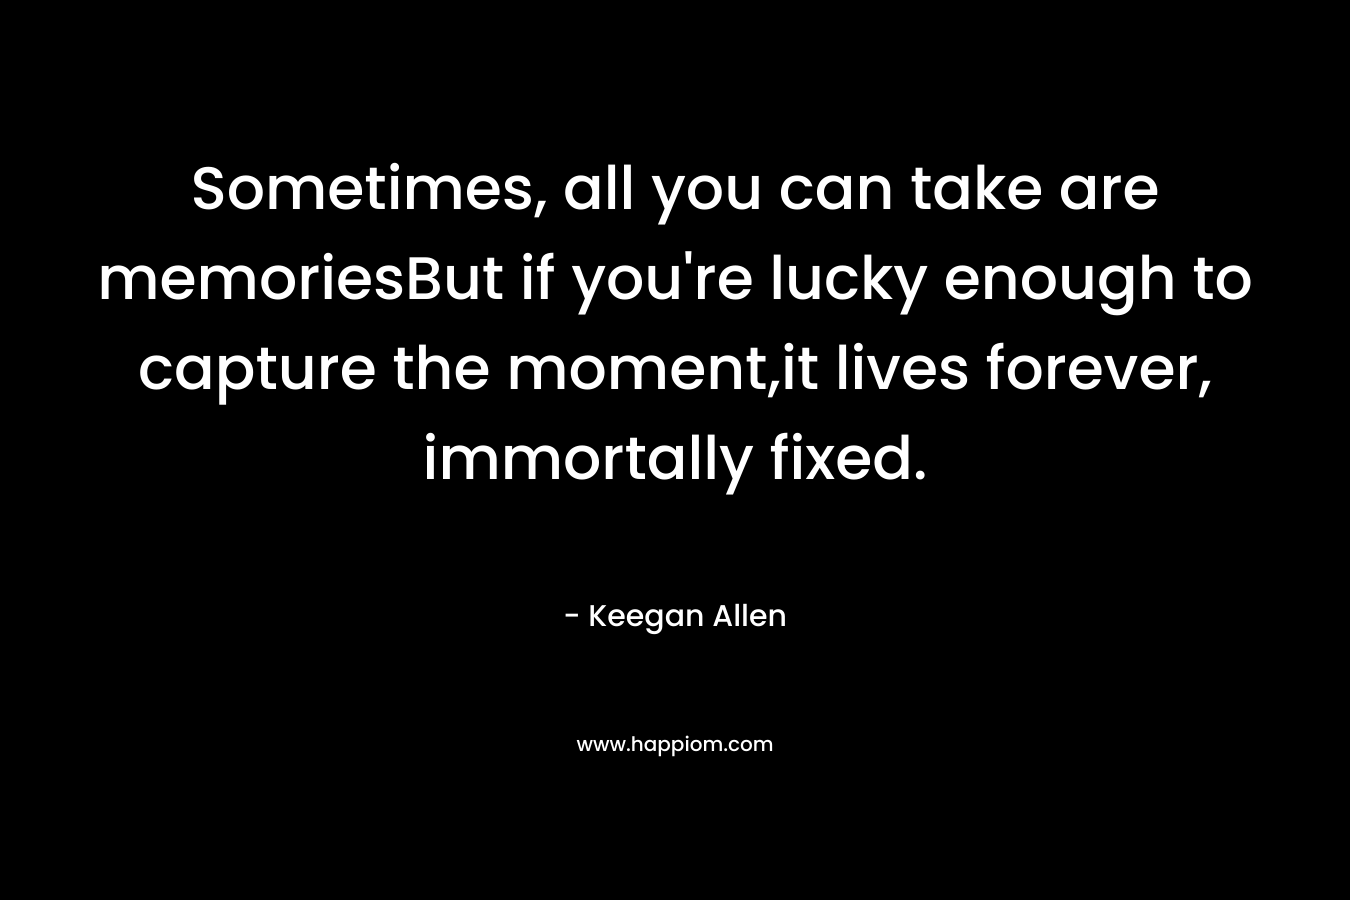 Sometimes, all you can take are memoriesBut if you’re lucky enough to capture the moment,it lives forever, immortally fixed. – Keegan Allen